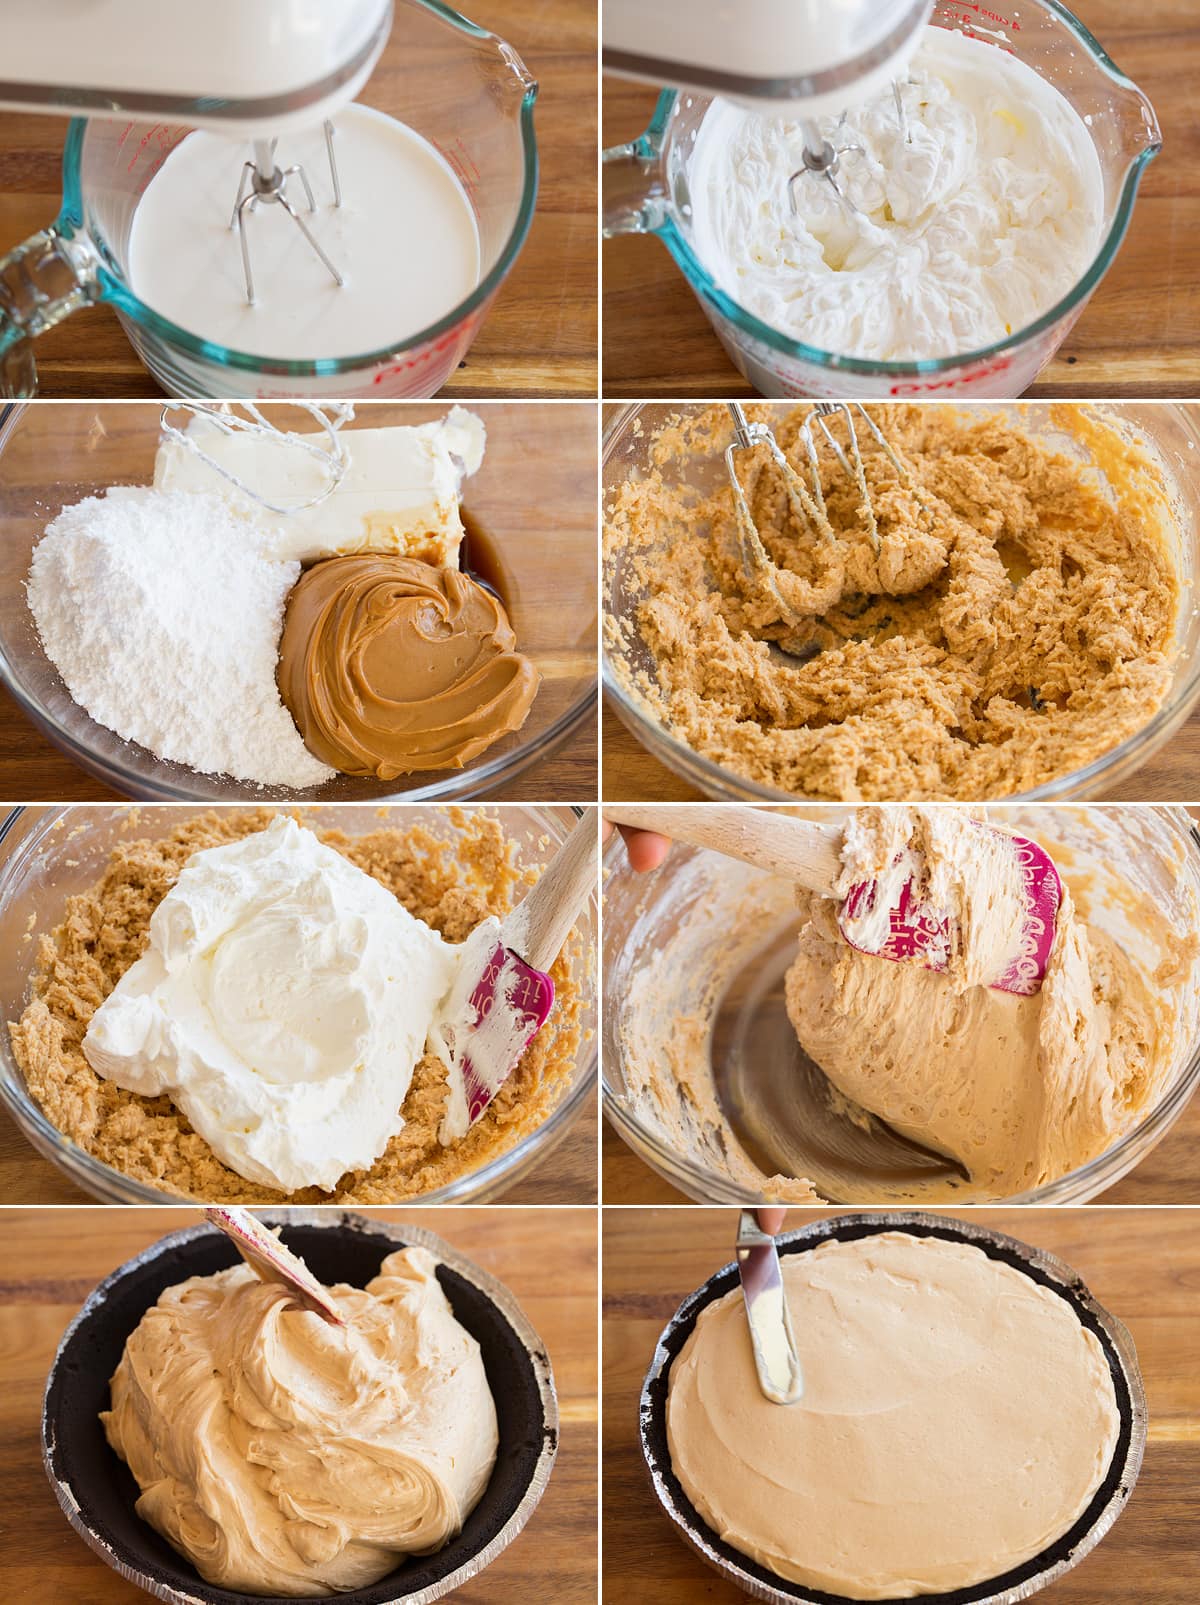 Collage of eight images showing steps to making peanut butter pie filling and adding to crust.